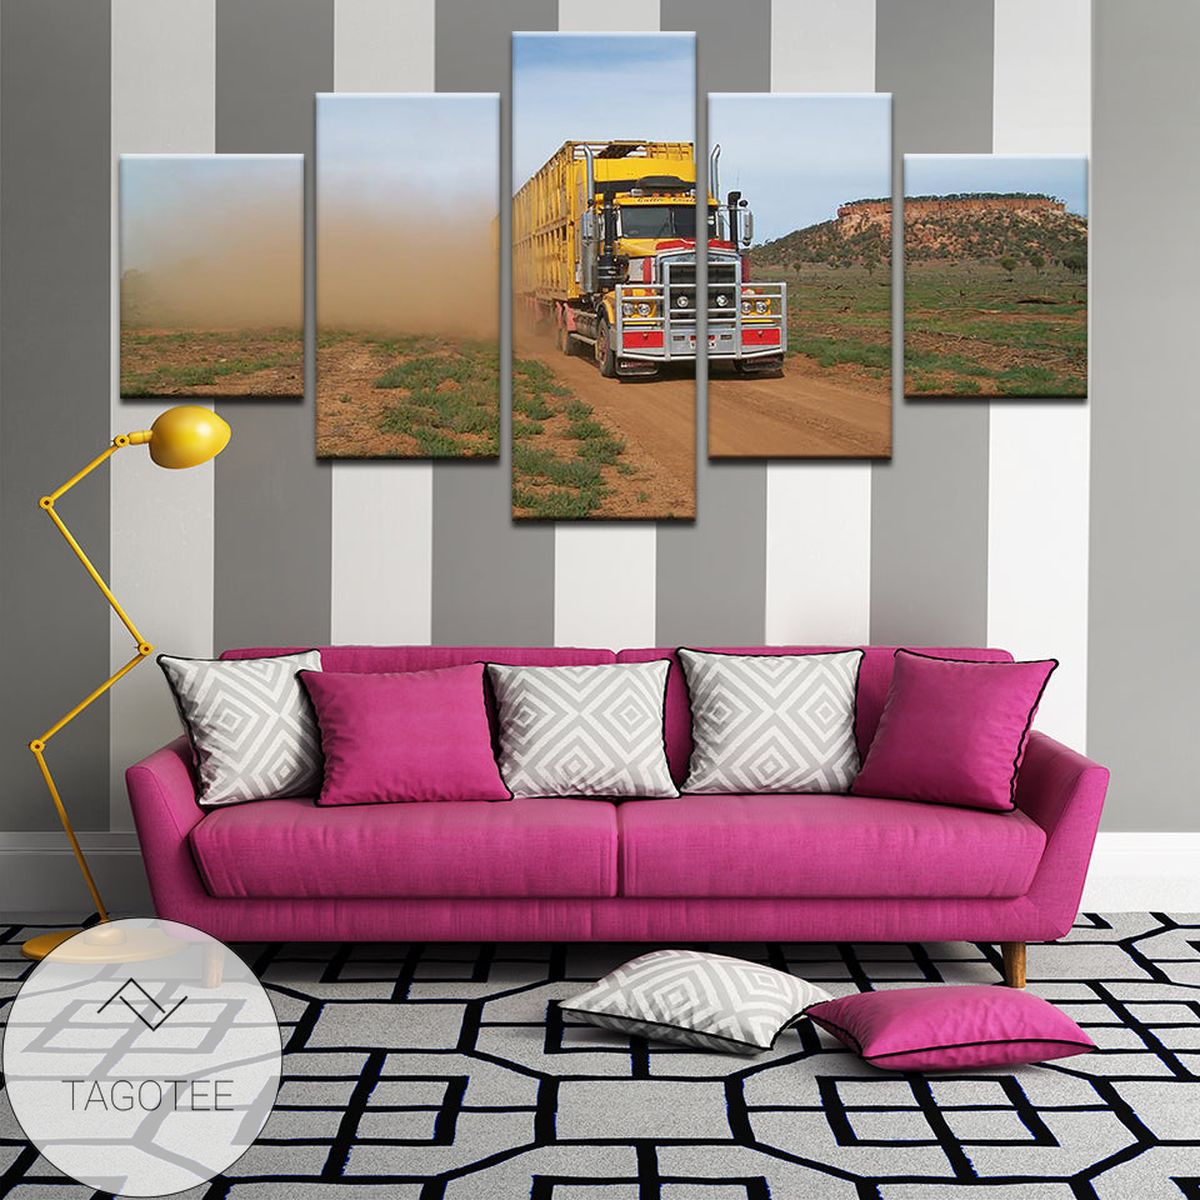 Road Train In The Australian Outback Five Panel Canvas 5 Piece Wall Art Set